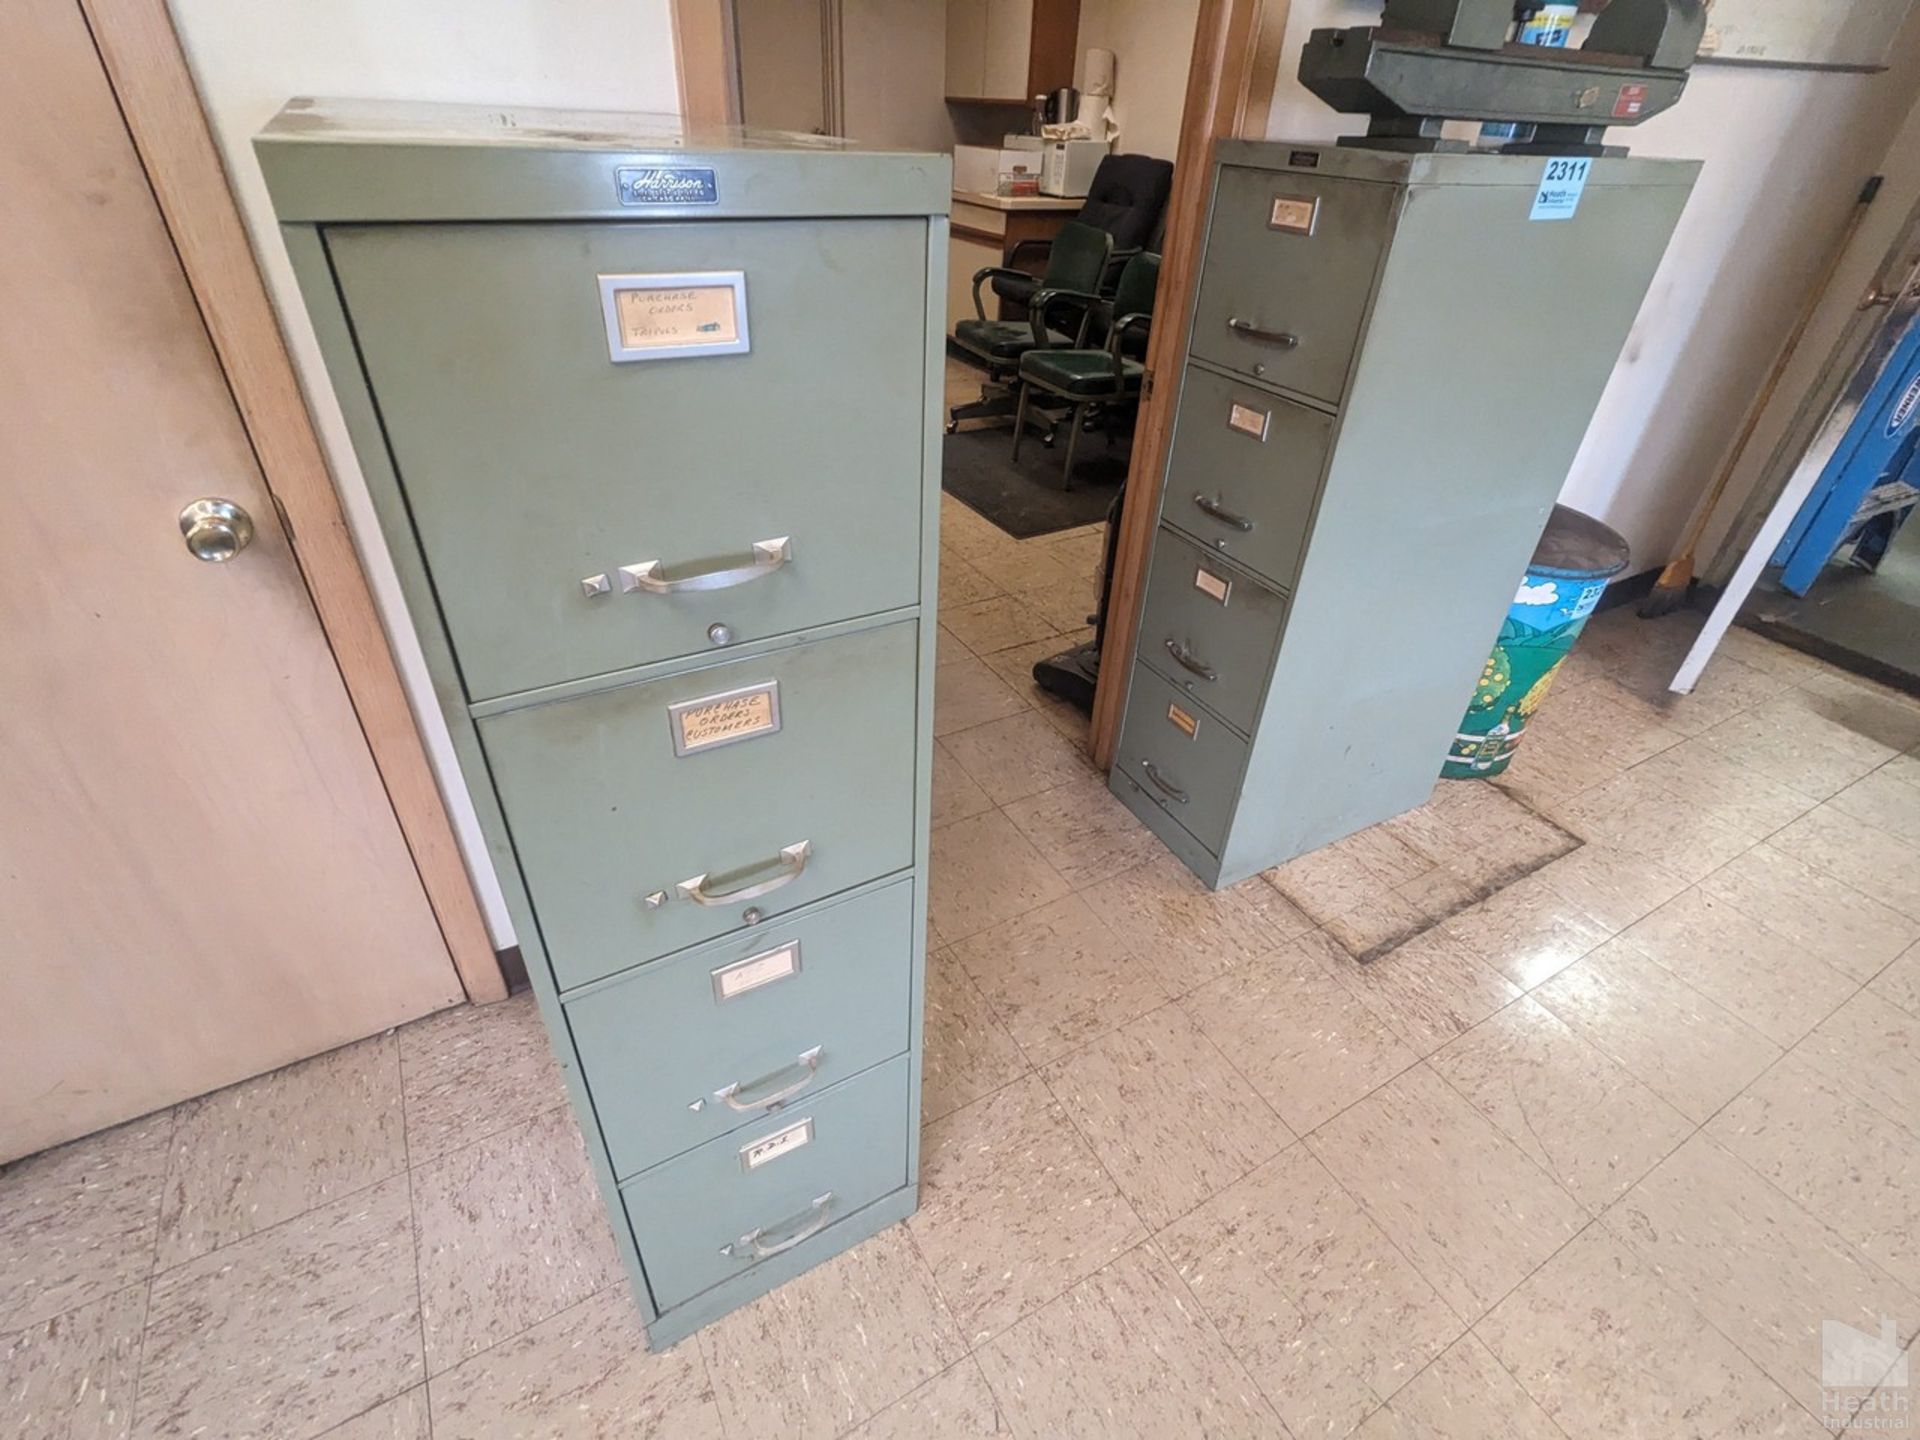 (2) HAMILTON FOUR DRAWER STEEL FILE CABINETS